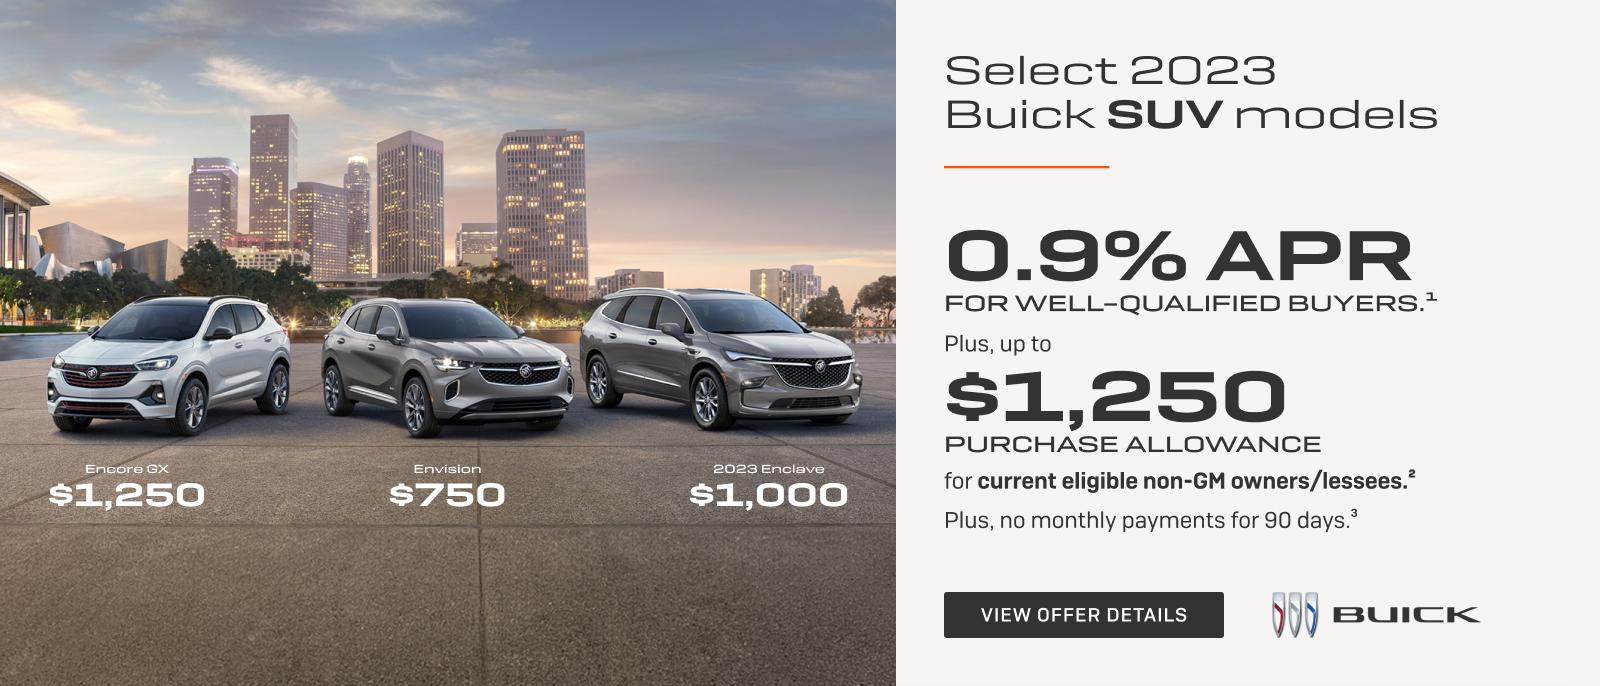 0.9% APR 
FOR WELL-QUALIFIED BUYERS.1

Plus, up to $1,250 PURCHASE ALLOWANCE for current eligible non-GM owners/lessees.2

Plus, no monthly payments for 90 days.3